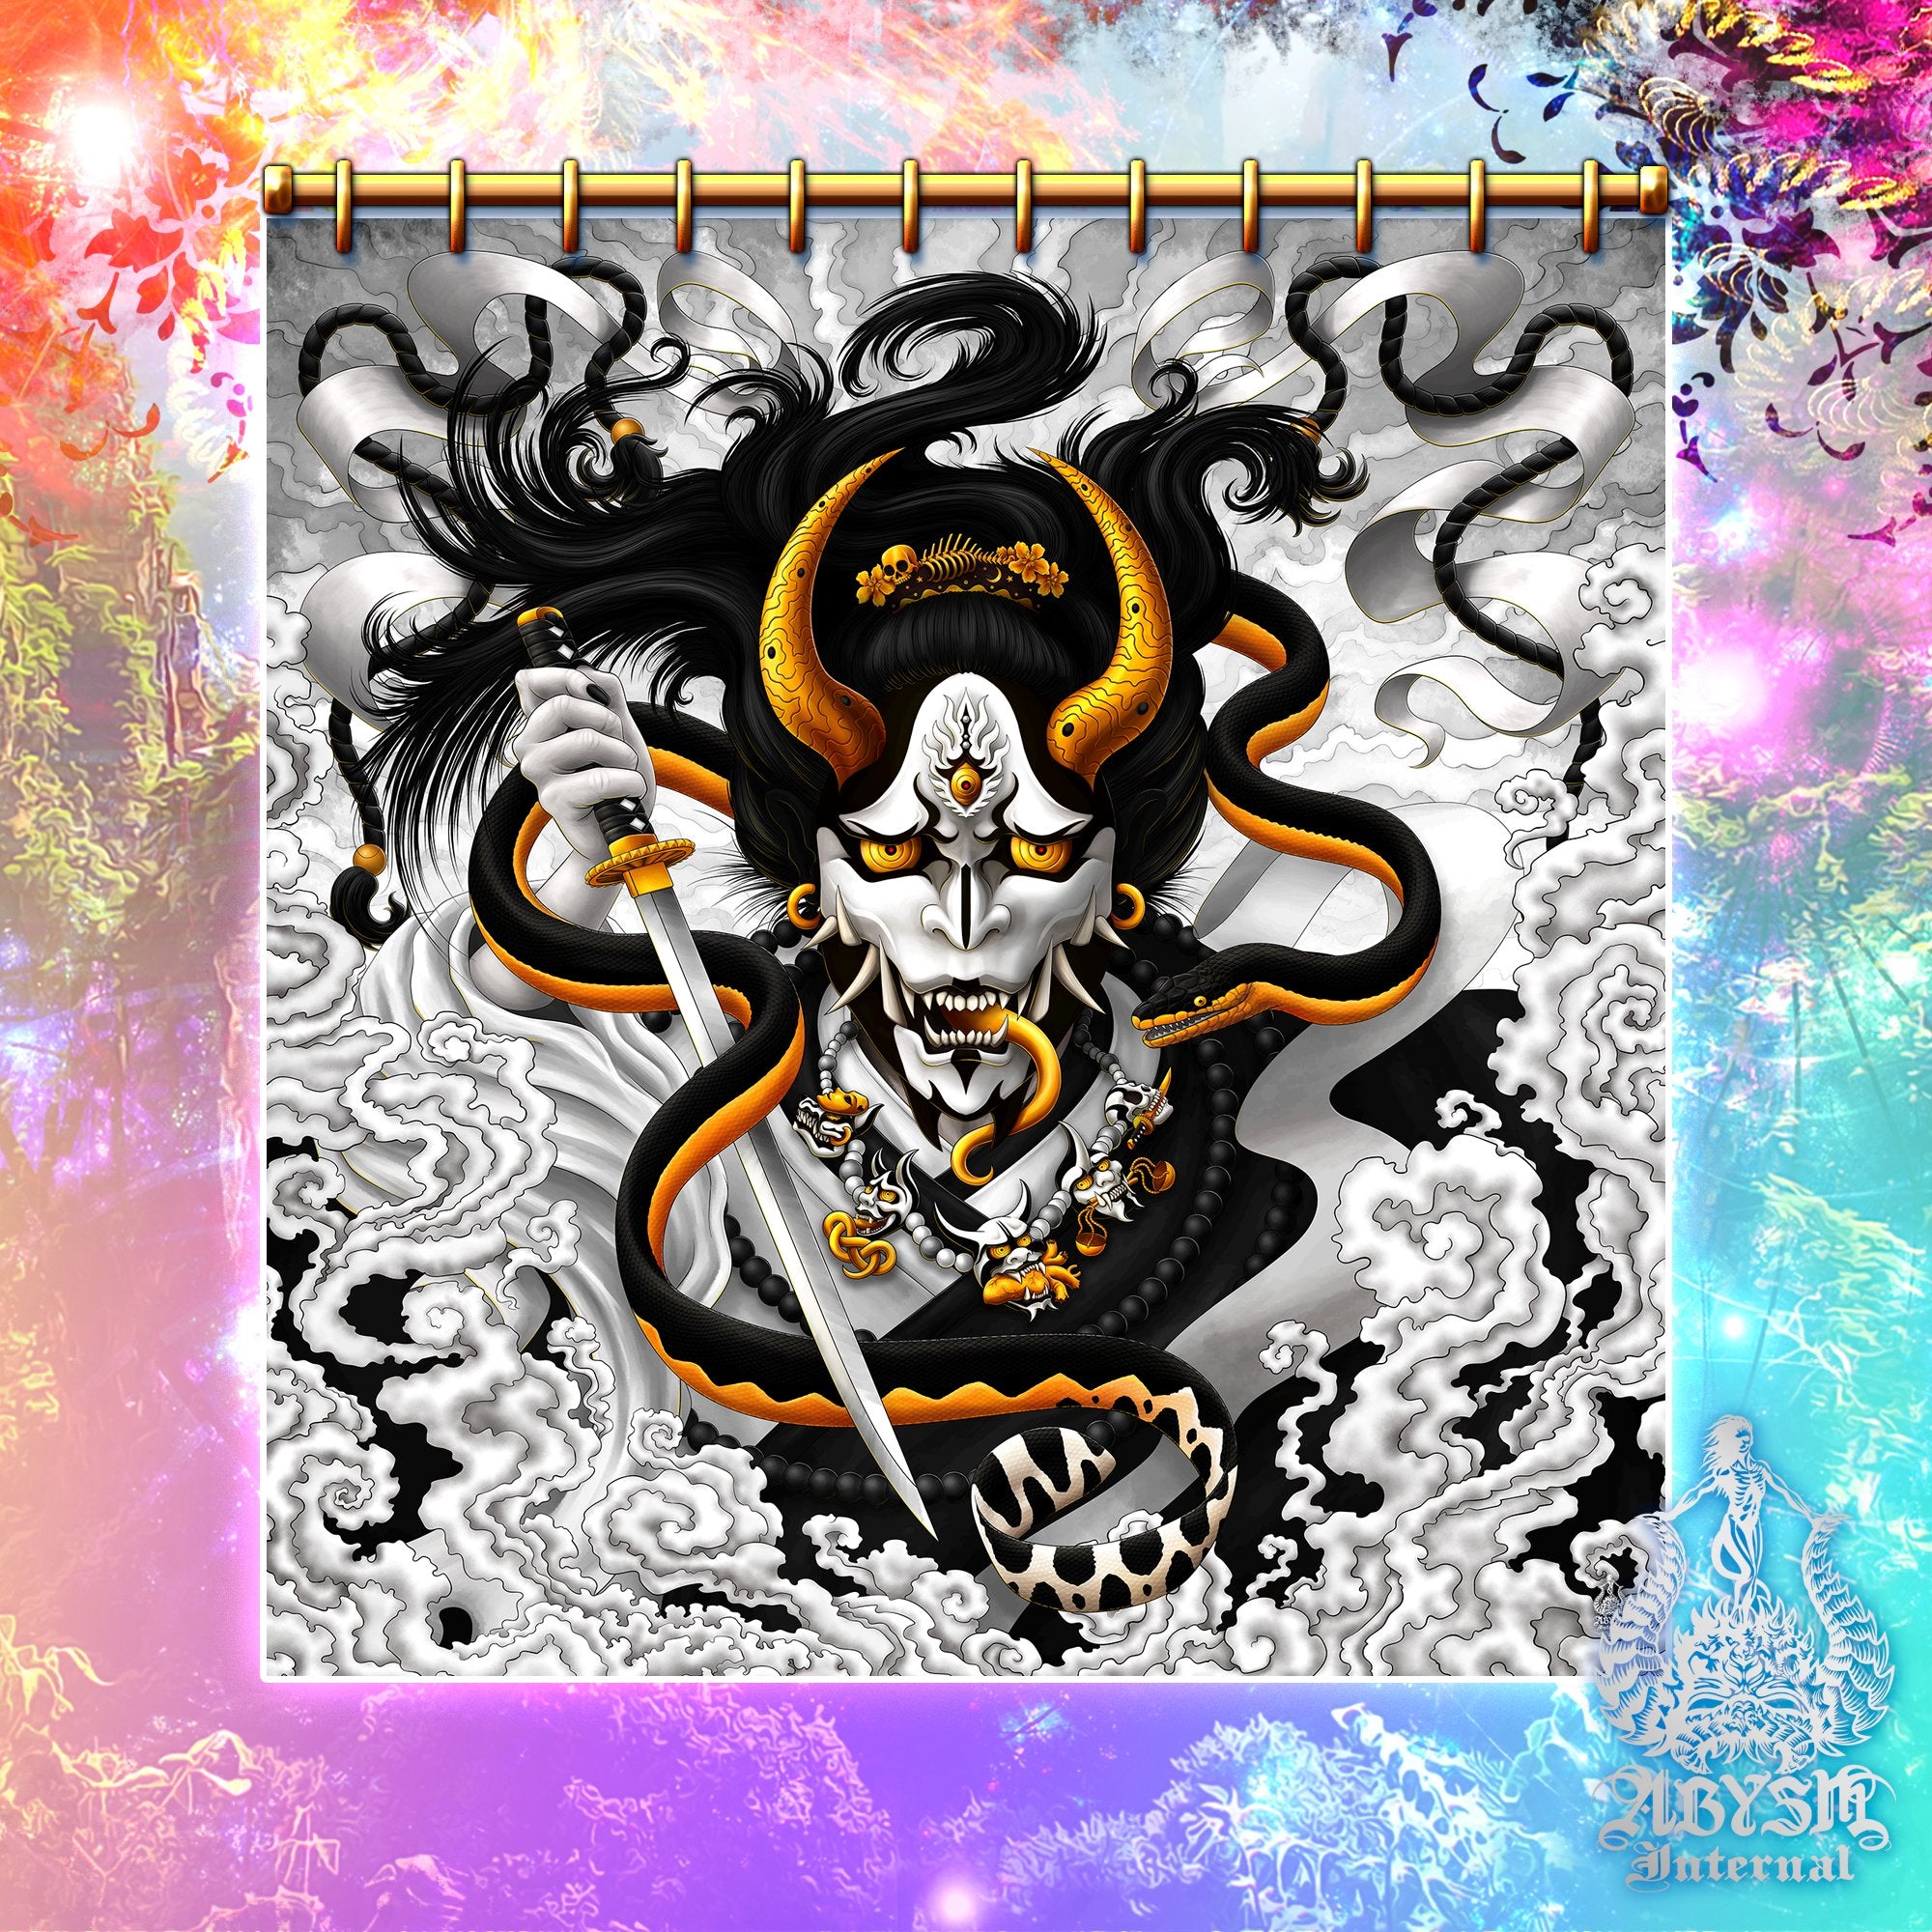 Hannya and Snake Shower Curtain, 71x74 inches, Japanese Demon, Youkai Anime and Gamer Bathroom Decor - Black and White - Abysm Internal